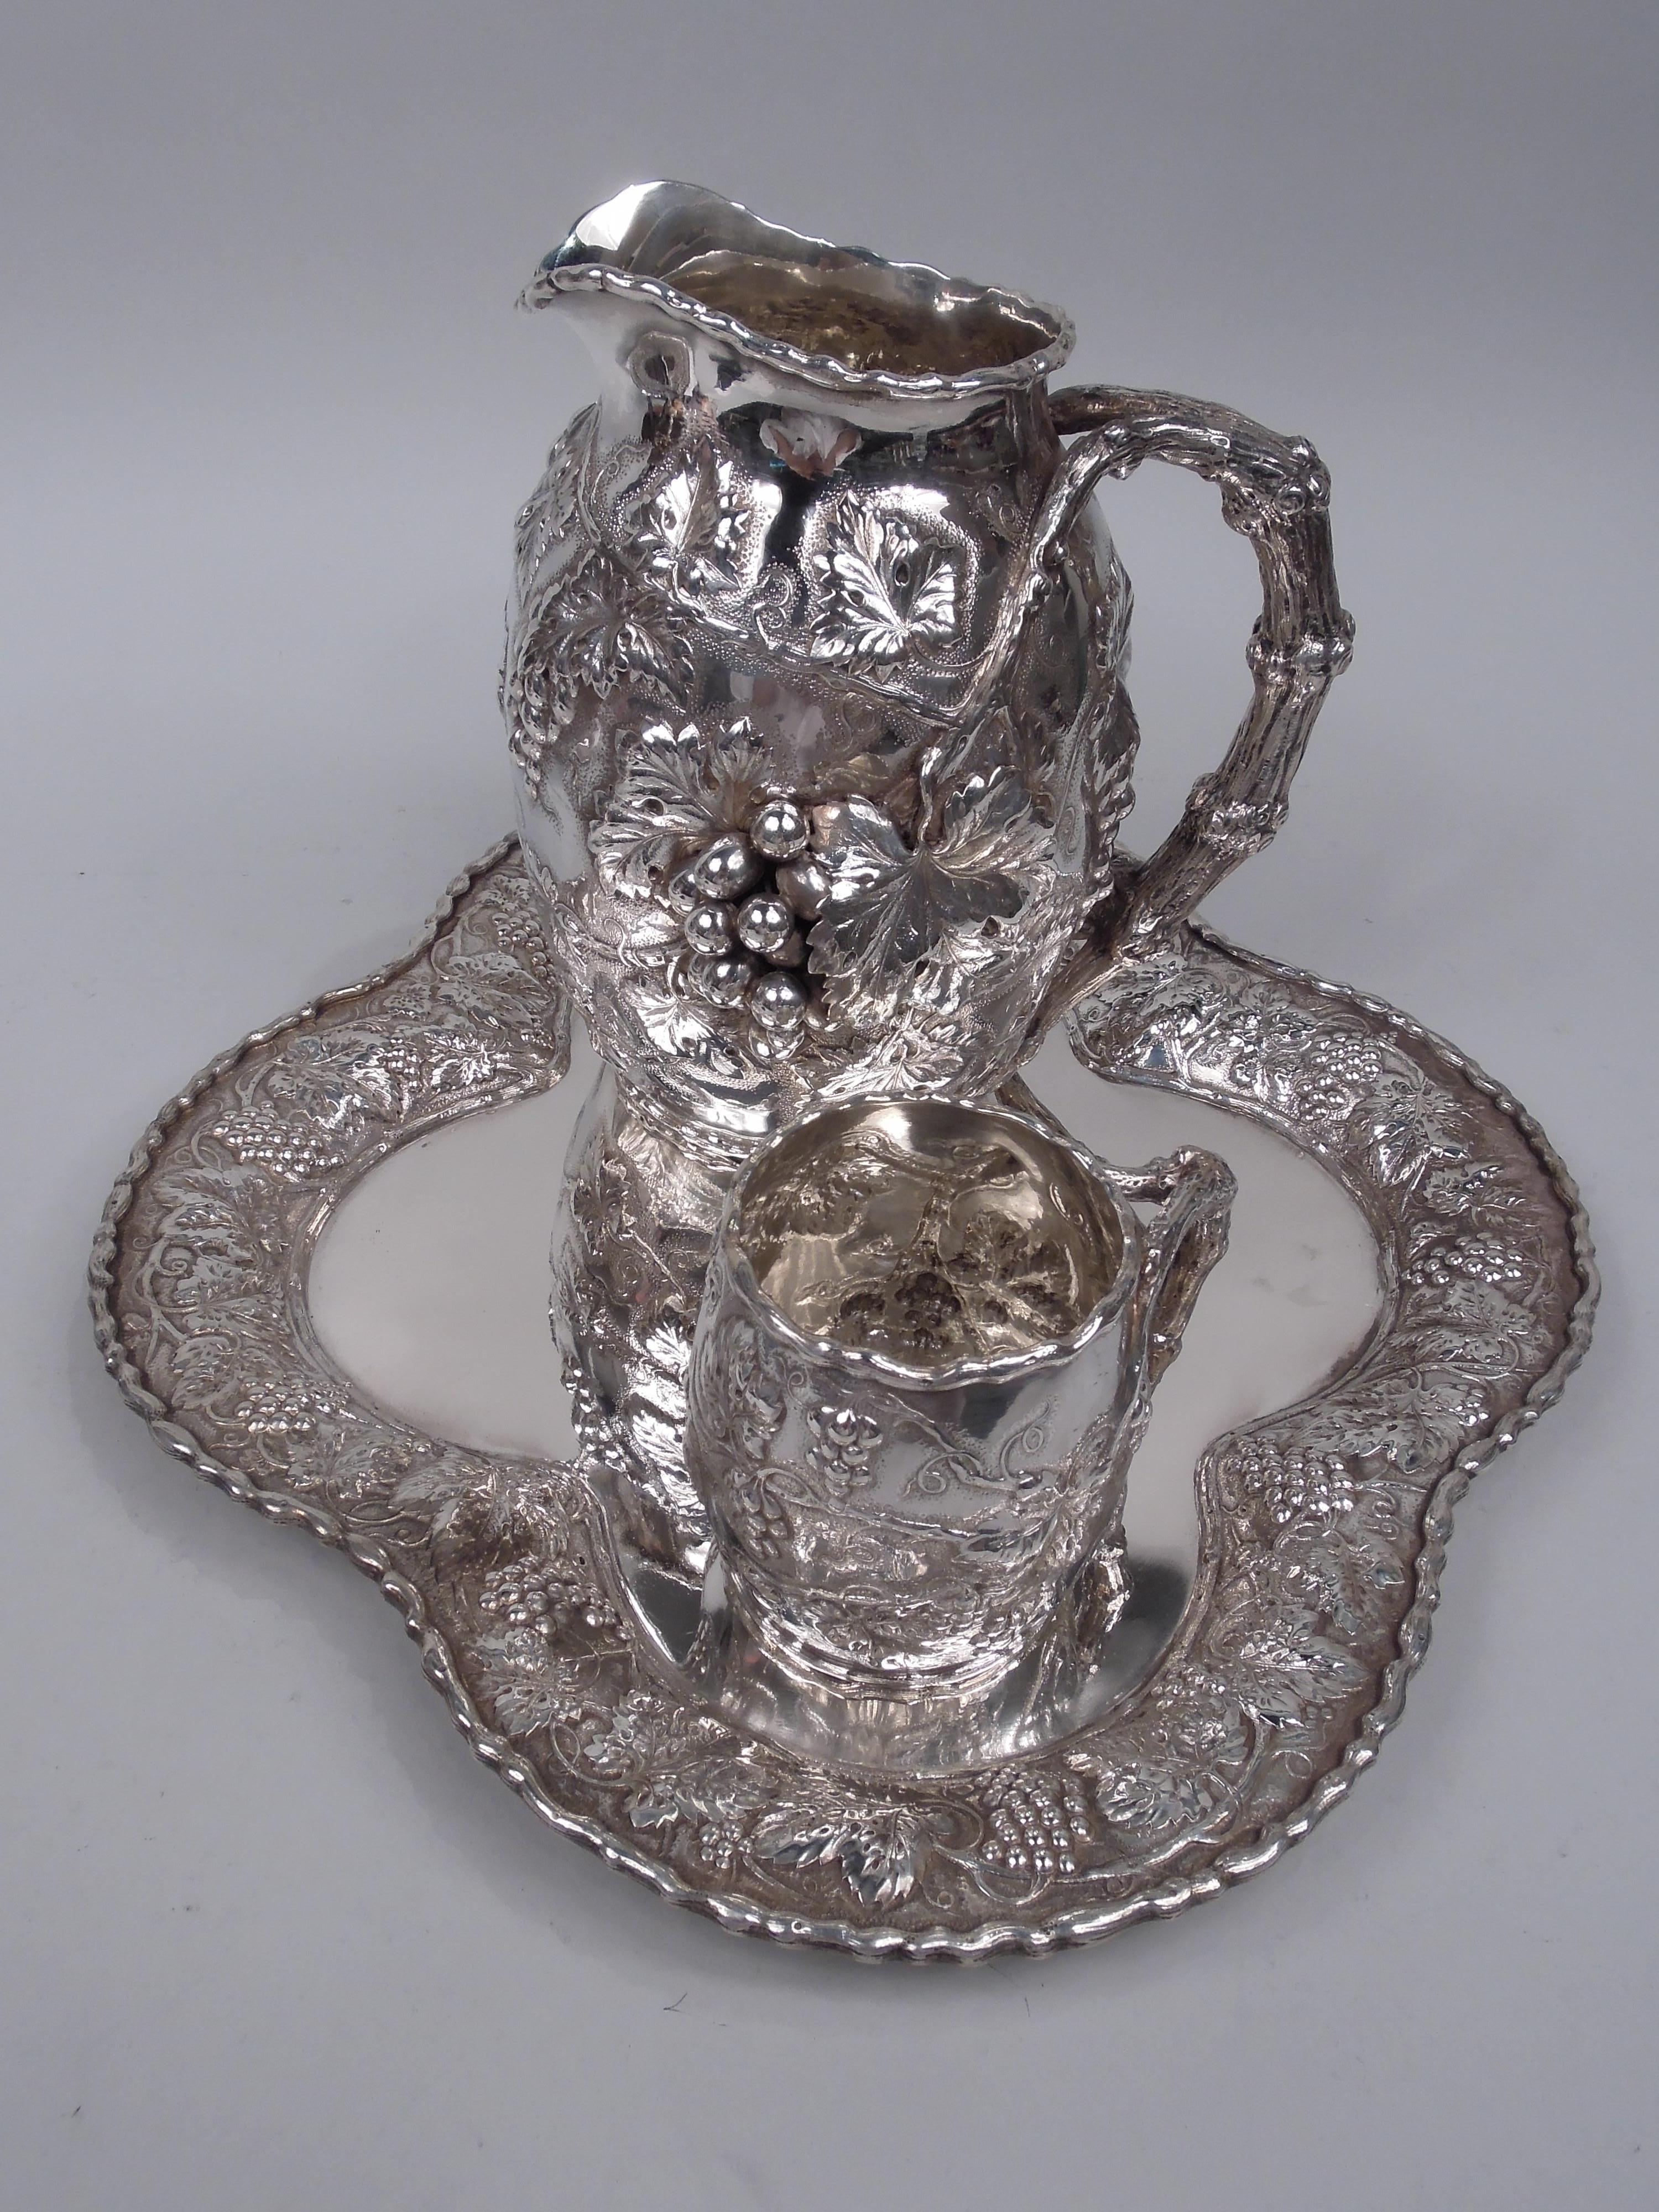 Victorian sterling silver drinks set. Made by Gorham in Providence in 1888. This set comprises pitcher and mug on tray. Pitcher and mug have curved bodies and split-mounted branch handles. Tray lobed quatrefoil. Applied scroll rims. For fermented